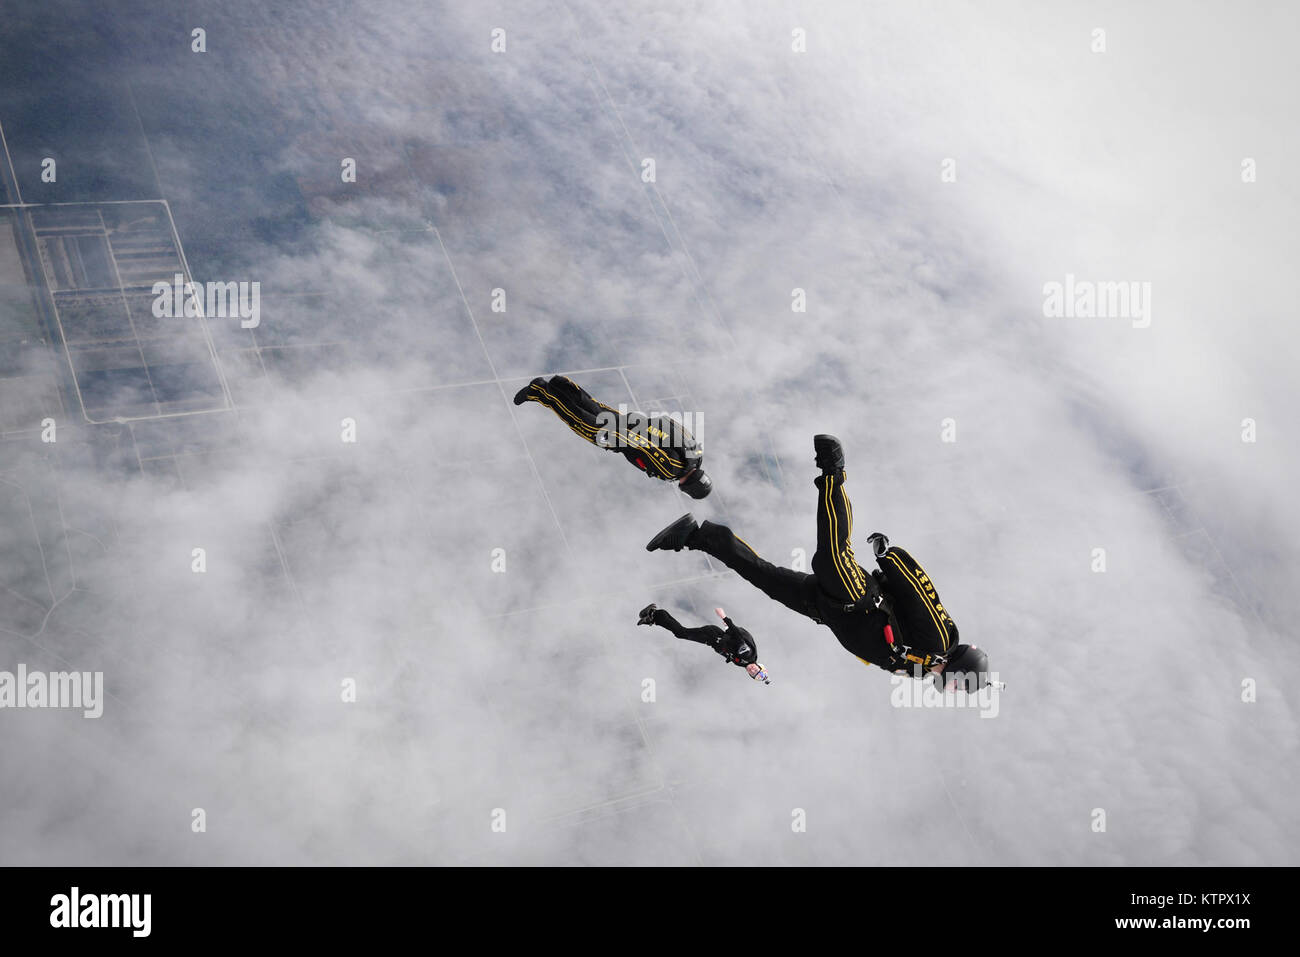 HOMESTEAD AIR RESERVE BASE, FL - Staff Sgt. Brandon Parra, Specialist Jason Winger and instructor Mike Sanson, all members of the Army's Golden Knights demonstration team, conduct a training jump over Homestead Air Reserve Base on January 19, 2016.  (US Air National Guard / Staff Sgt. Christopher S. Muncy / released) Stock Photo